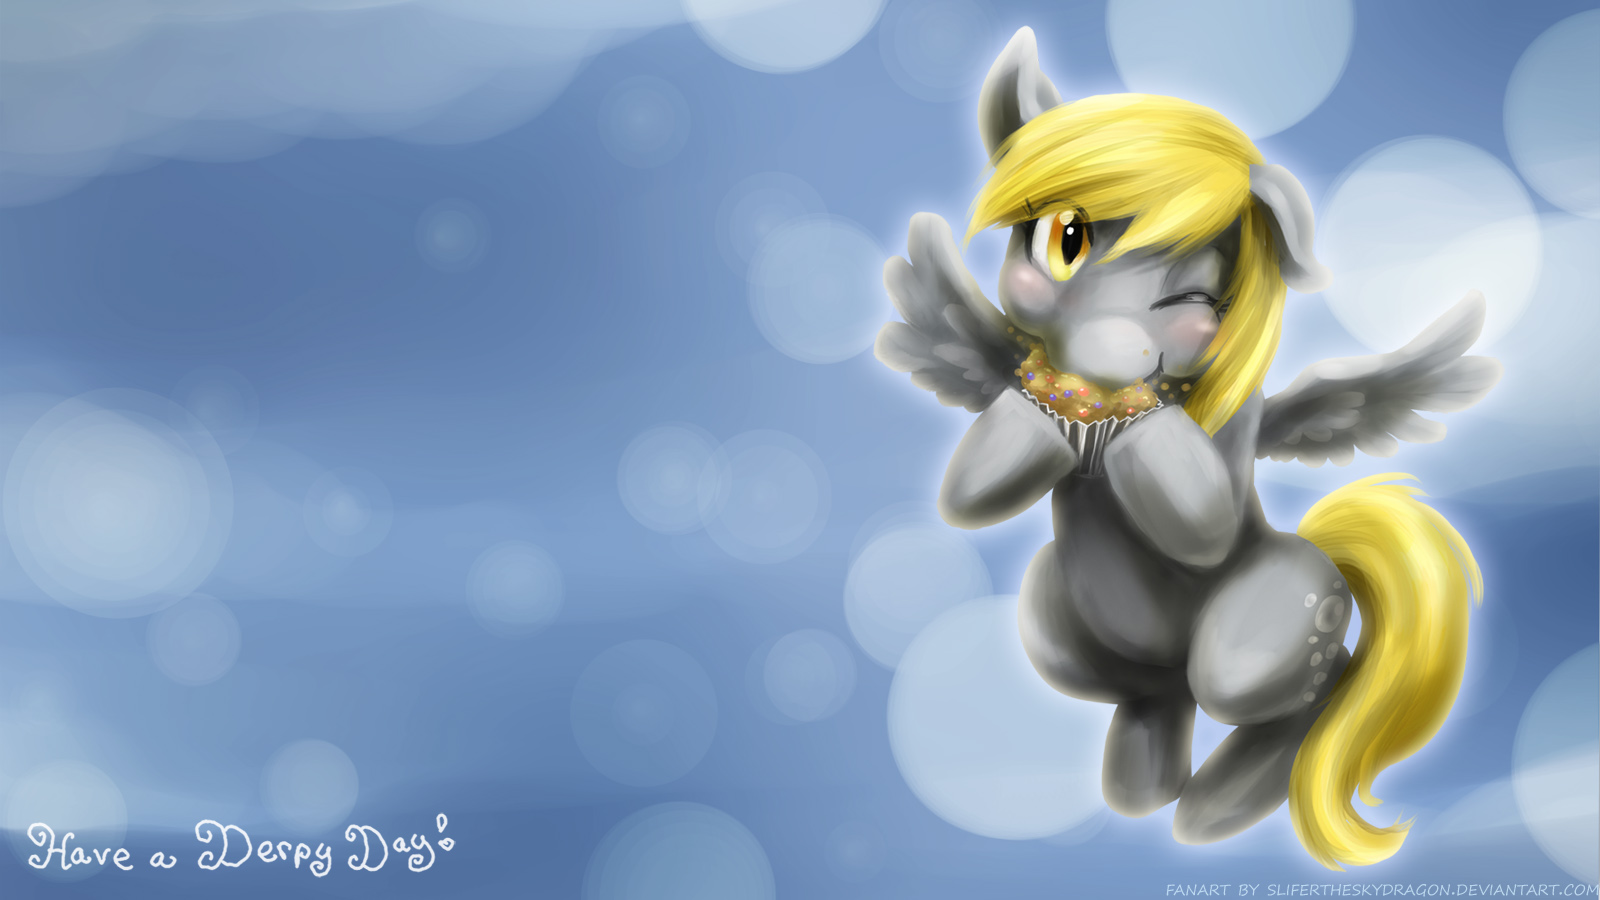 Have A Derpy Wallpaper Widescreen By Slifertheskydragon On